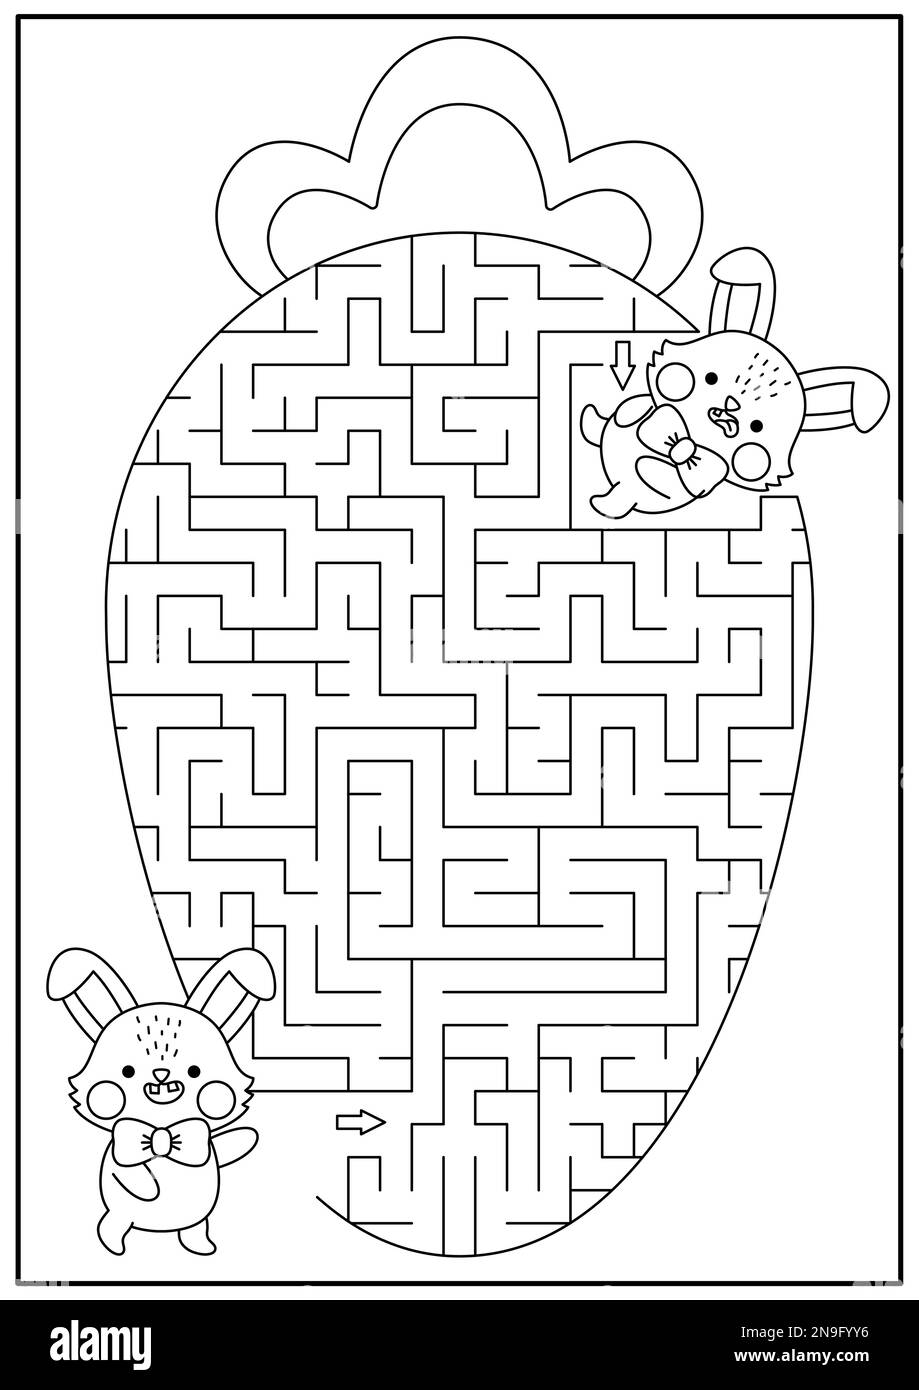 Easter black and white maze for kids. Spring holiday preschool printable activity with kawaii bunny eating big carrot. Geometrical labyrinth game, puz Stock Vector